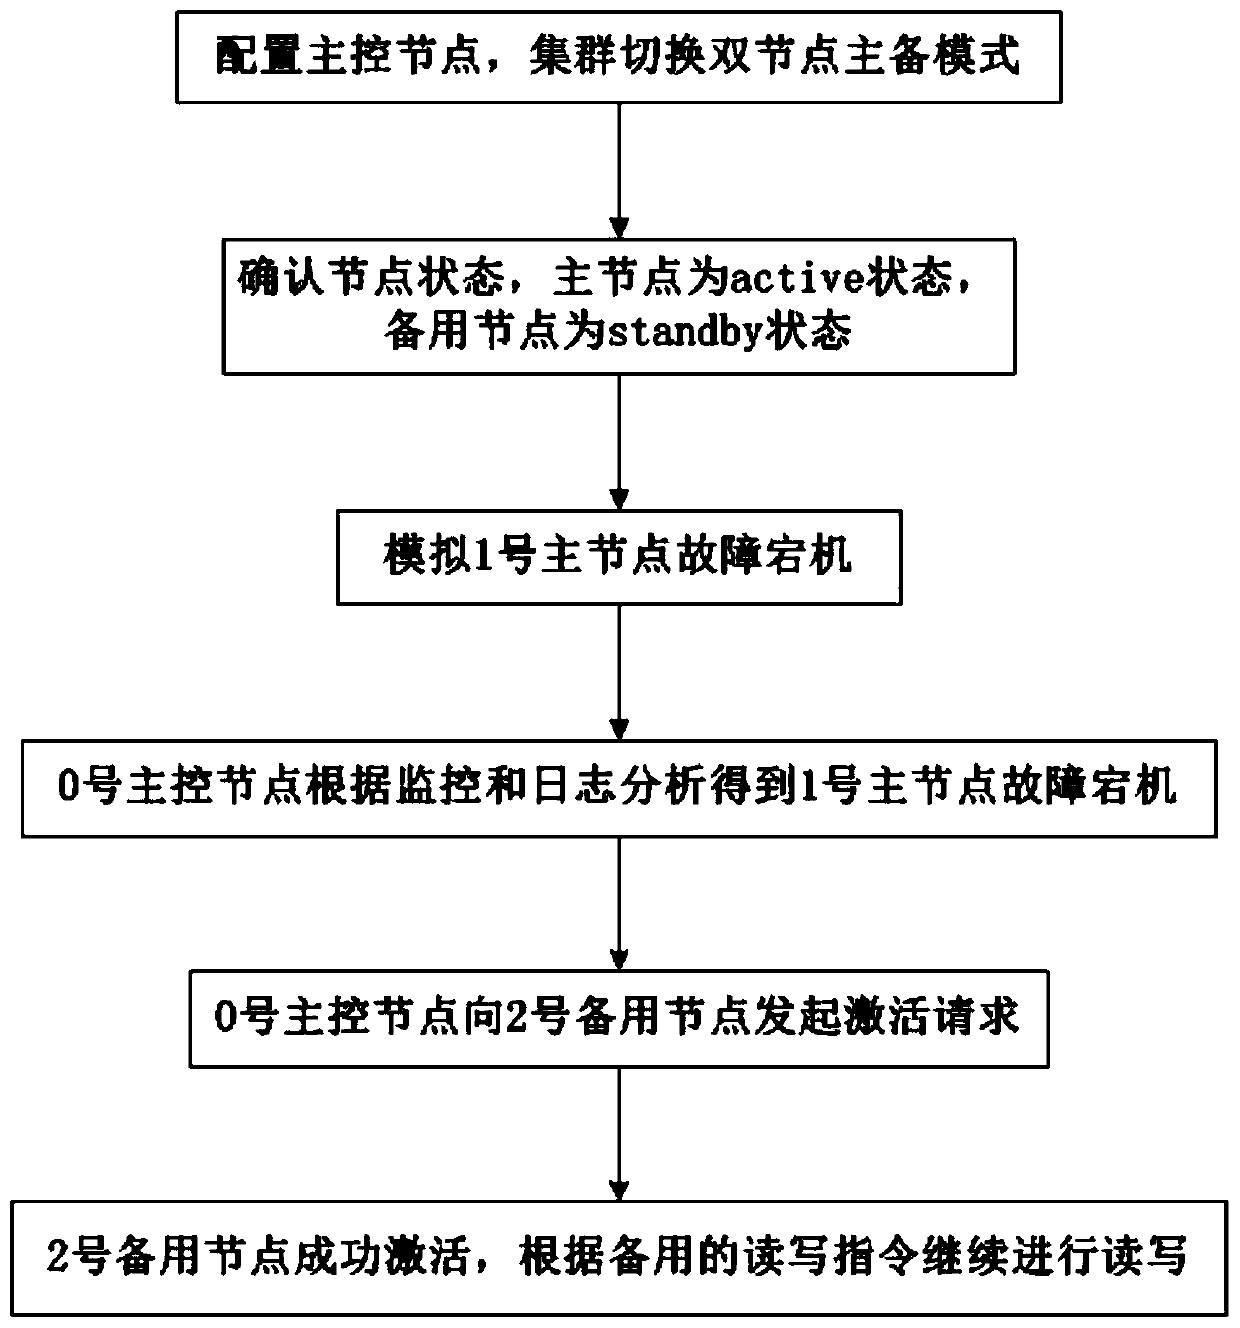 NAS distributed storage array and VMware mutual authentication test system, method and device